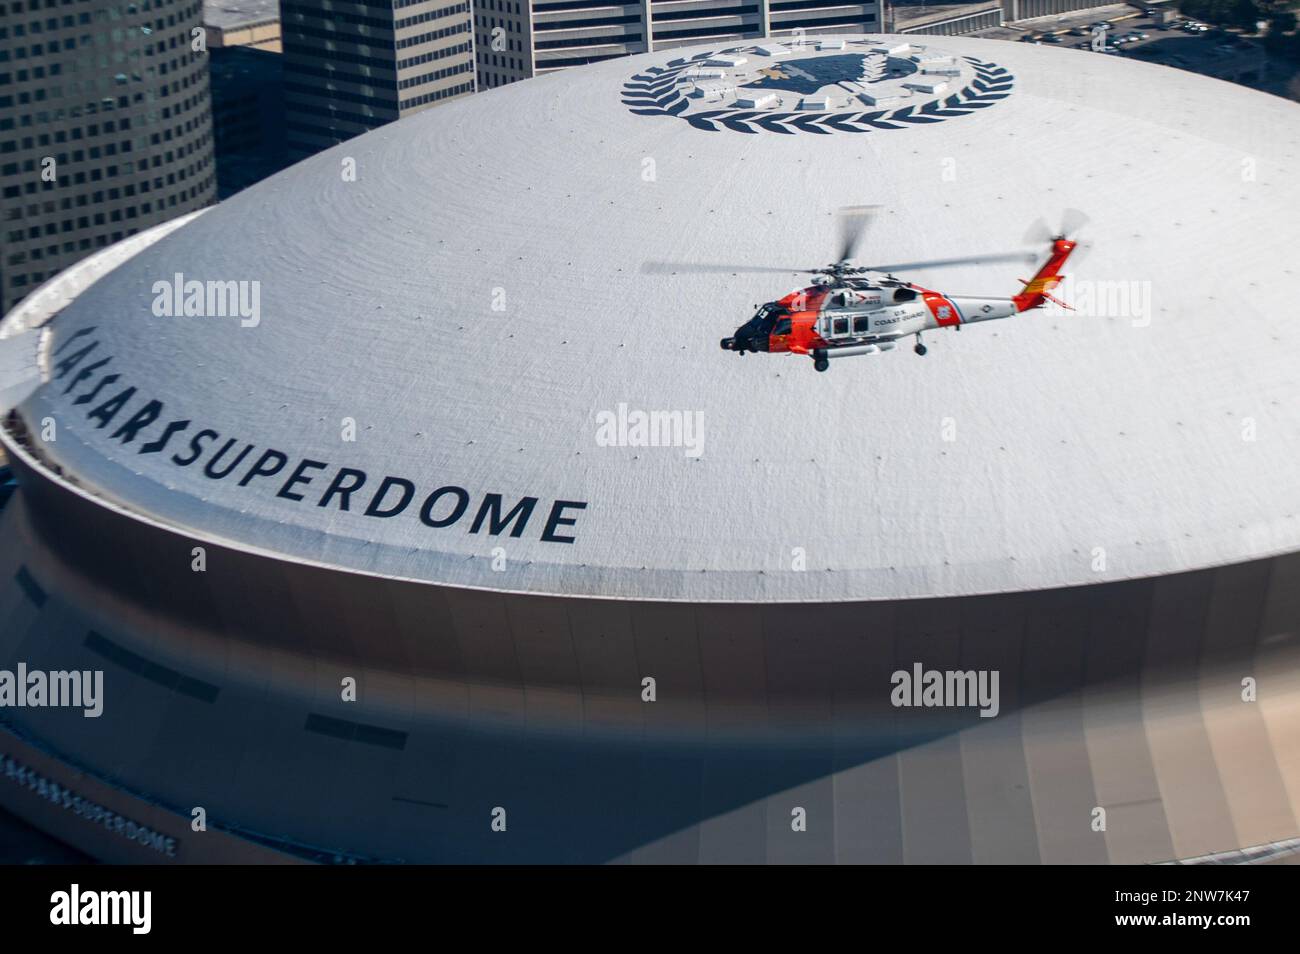 A Coast Guard Air Station New Orleans MH-60 Jayhawk aircrew flies over the Caesars Superdome in New Orleans, Louisiana on Jan. 26, 2023. Two Air Station New Orleans aircrews flew over the city before conducting emergency landing training and hoists. Stock Photo